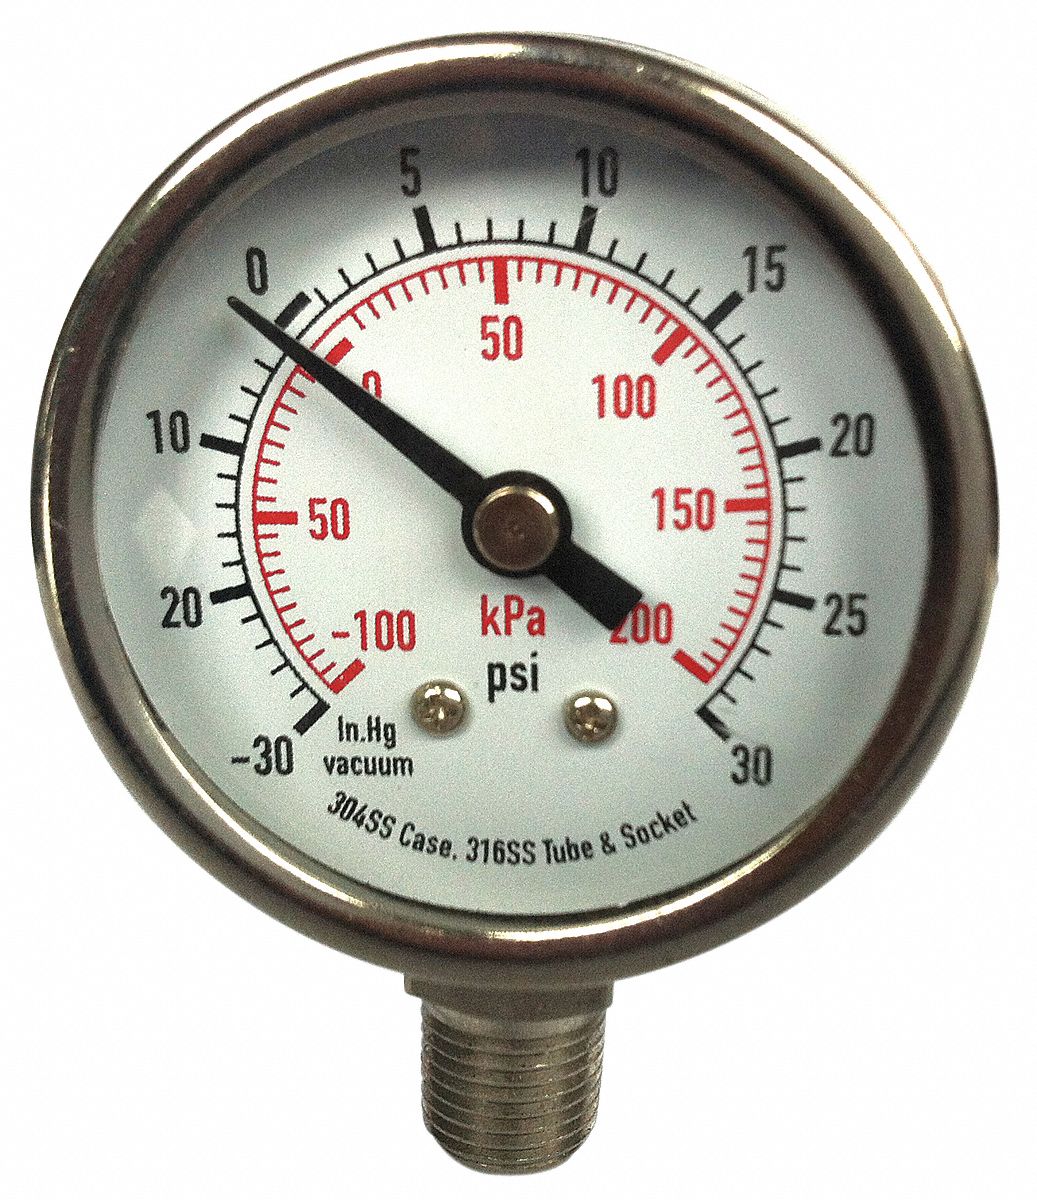 0 to 600 psi Test Pressure Gauge Stainless Steel with 2" Dial 1/4" MNPT 4FML3 